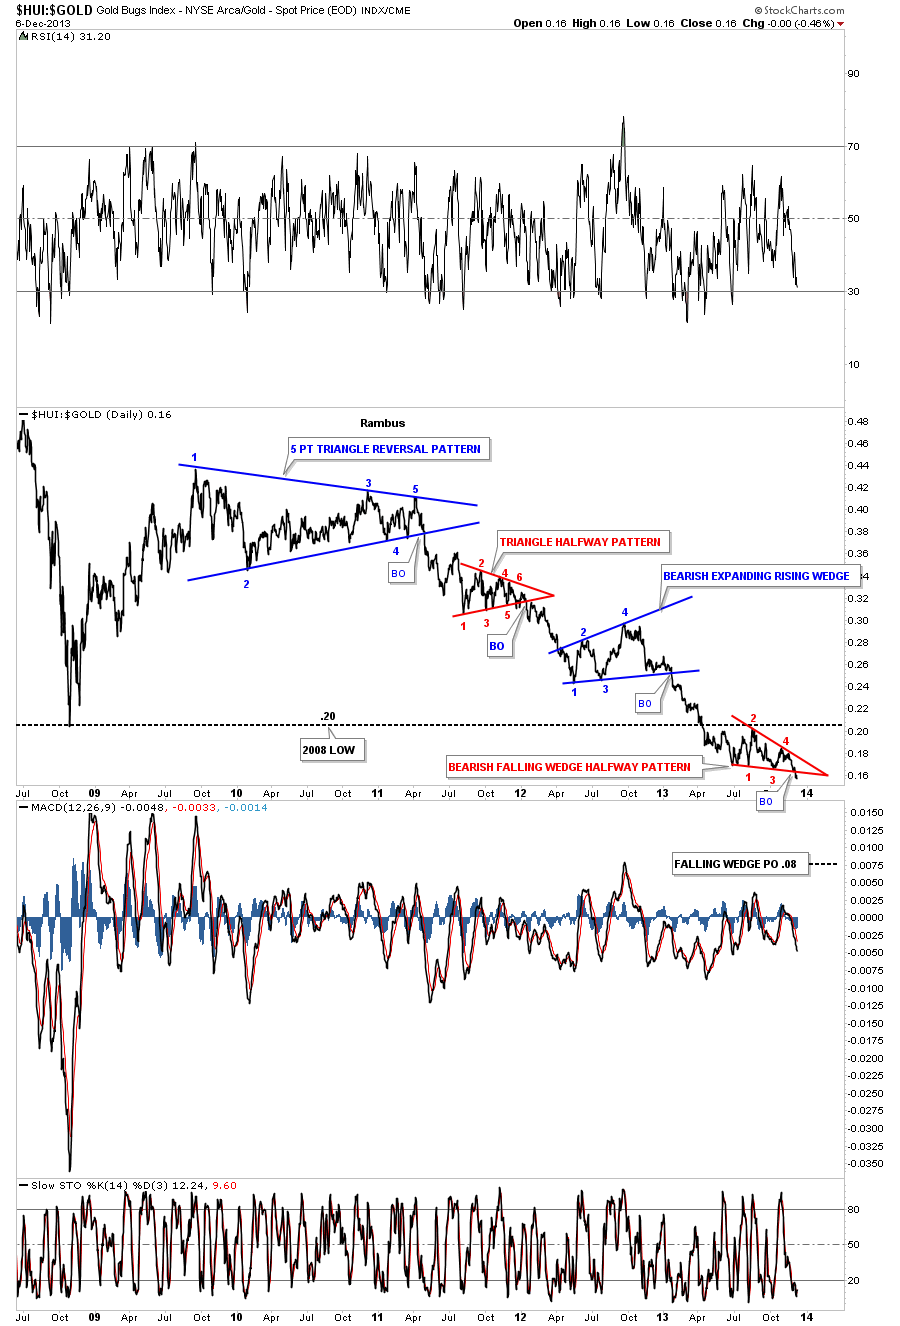 HUI TO GOLD FIRST RATIO CHART